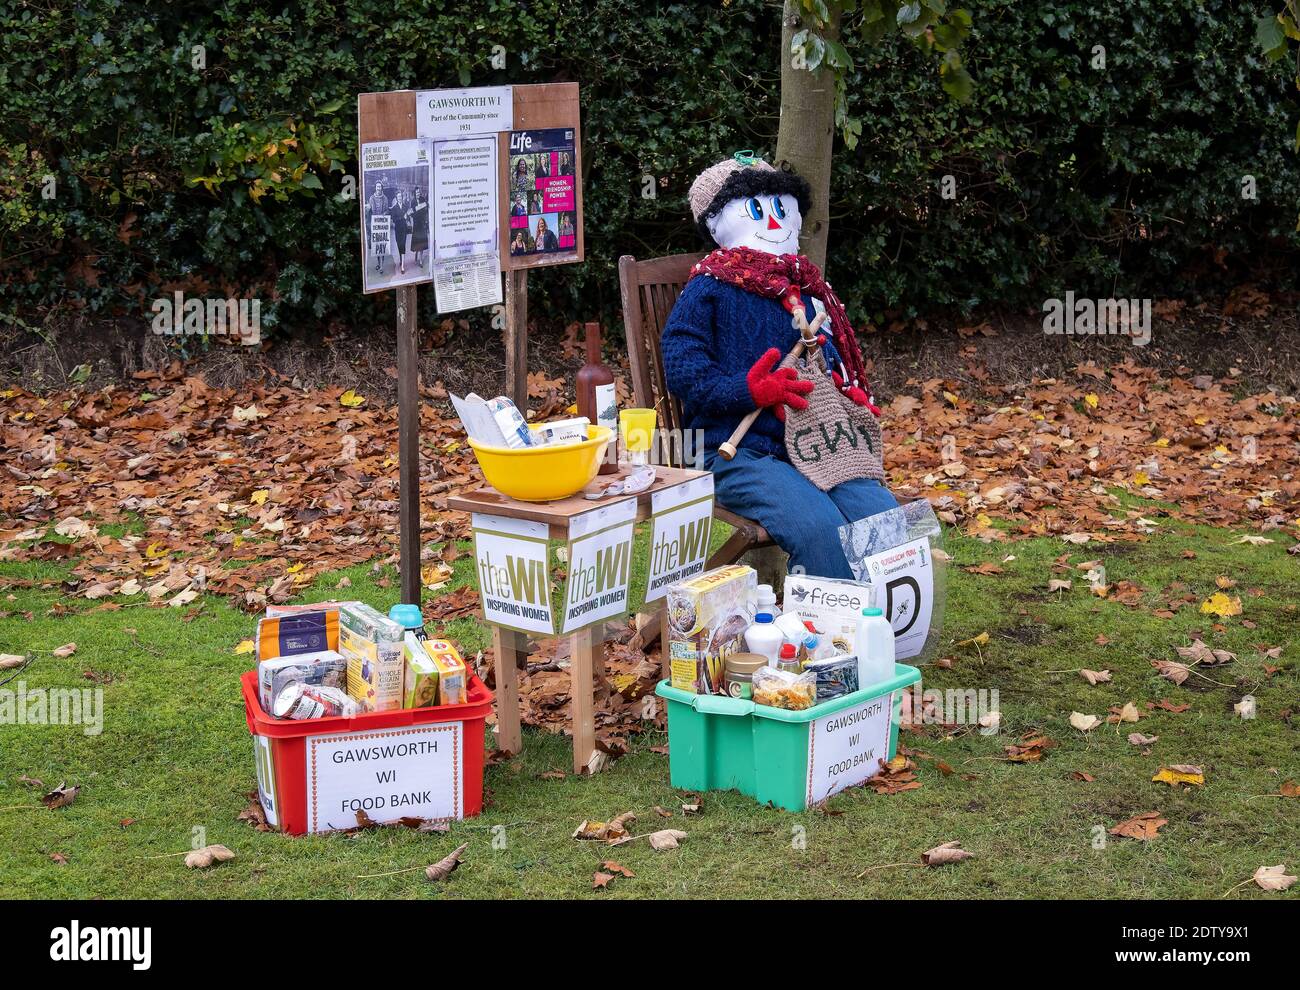 WI Women's Institute Scarecrow Foodbank, Gawsworth, Cheshire, Angleterre, Royaume-Uni Banque D'Images